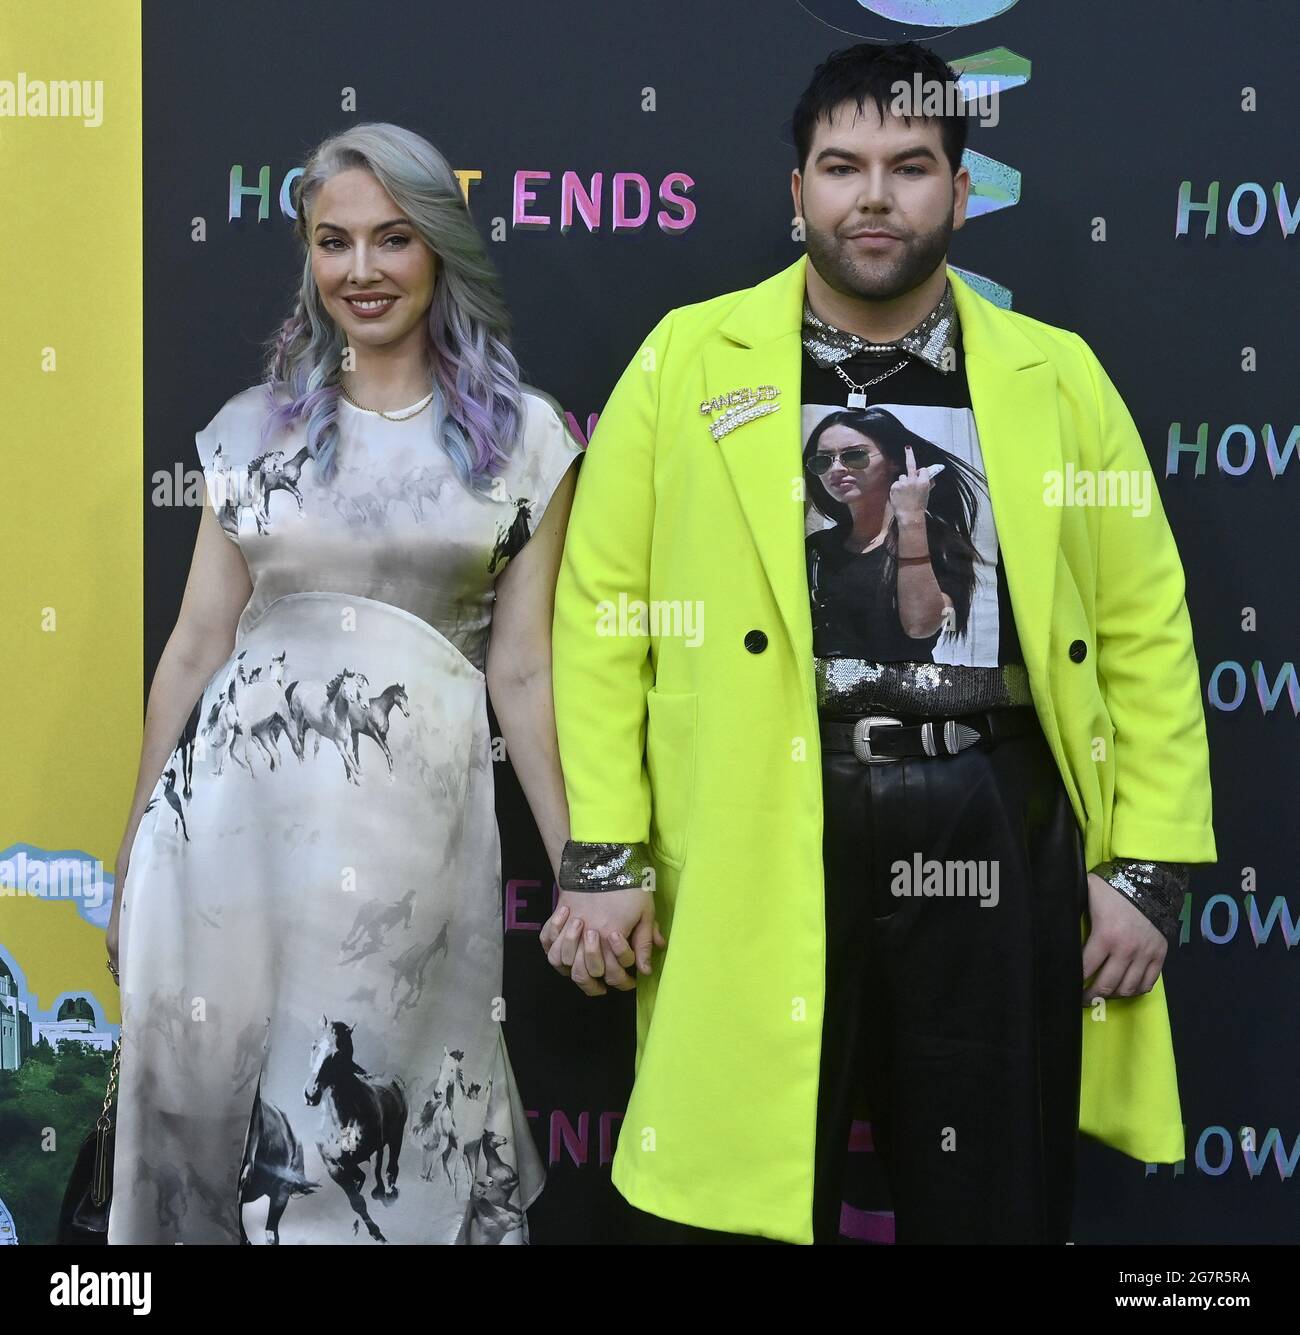 Los Angeles, United States. 16th July, 2021. Cast member Whitney Cummings (L) and Benton Ray attend the premiere of the motion picture comedy 'How It Ends' at NeueHouse in Los Angeles on Thursday, July 15, 2021. Storyline: In this feel-good apocalyptic comedy, Liza (Zoe Lister-Jones) embarks on a hilarious journey through LA in hopes of making it to her last party before it all ends, running into an eclectic cast of characters along the way. Photo by Jim Ruymen/UPI Credit: UPI/Alamy Live News Stock Photo